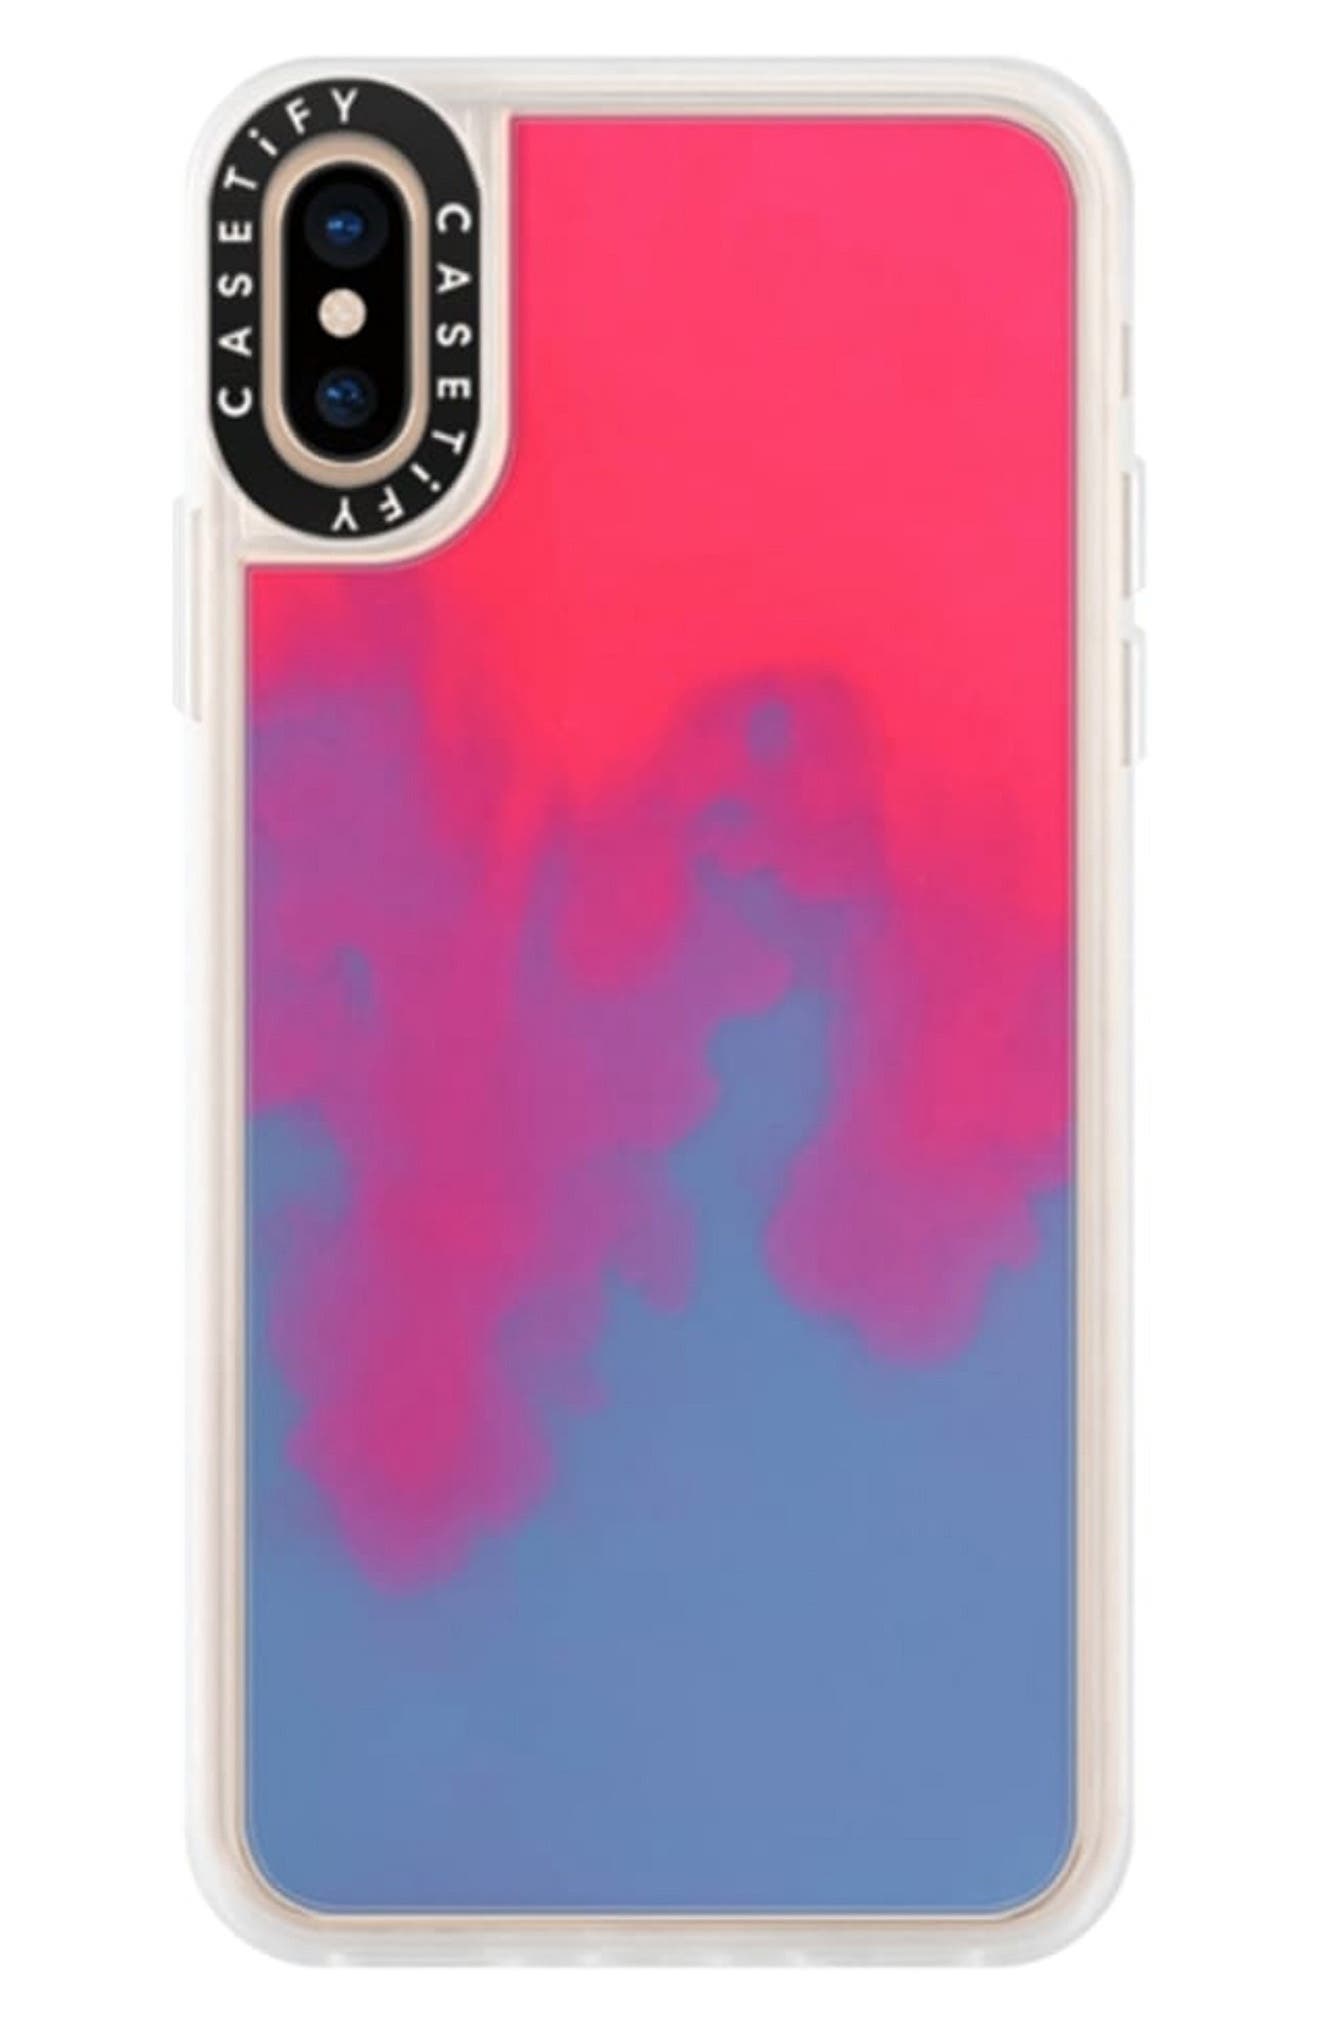 CASETiFY Neon Sand iPhone XS/XR Case in Exxxtra at Nordstrom